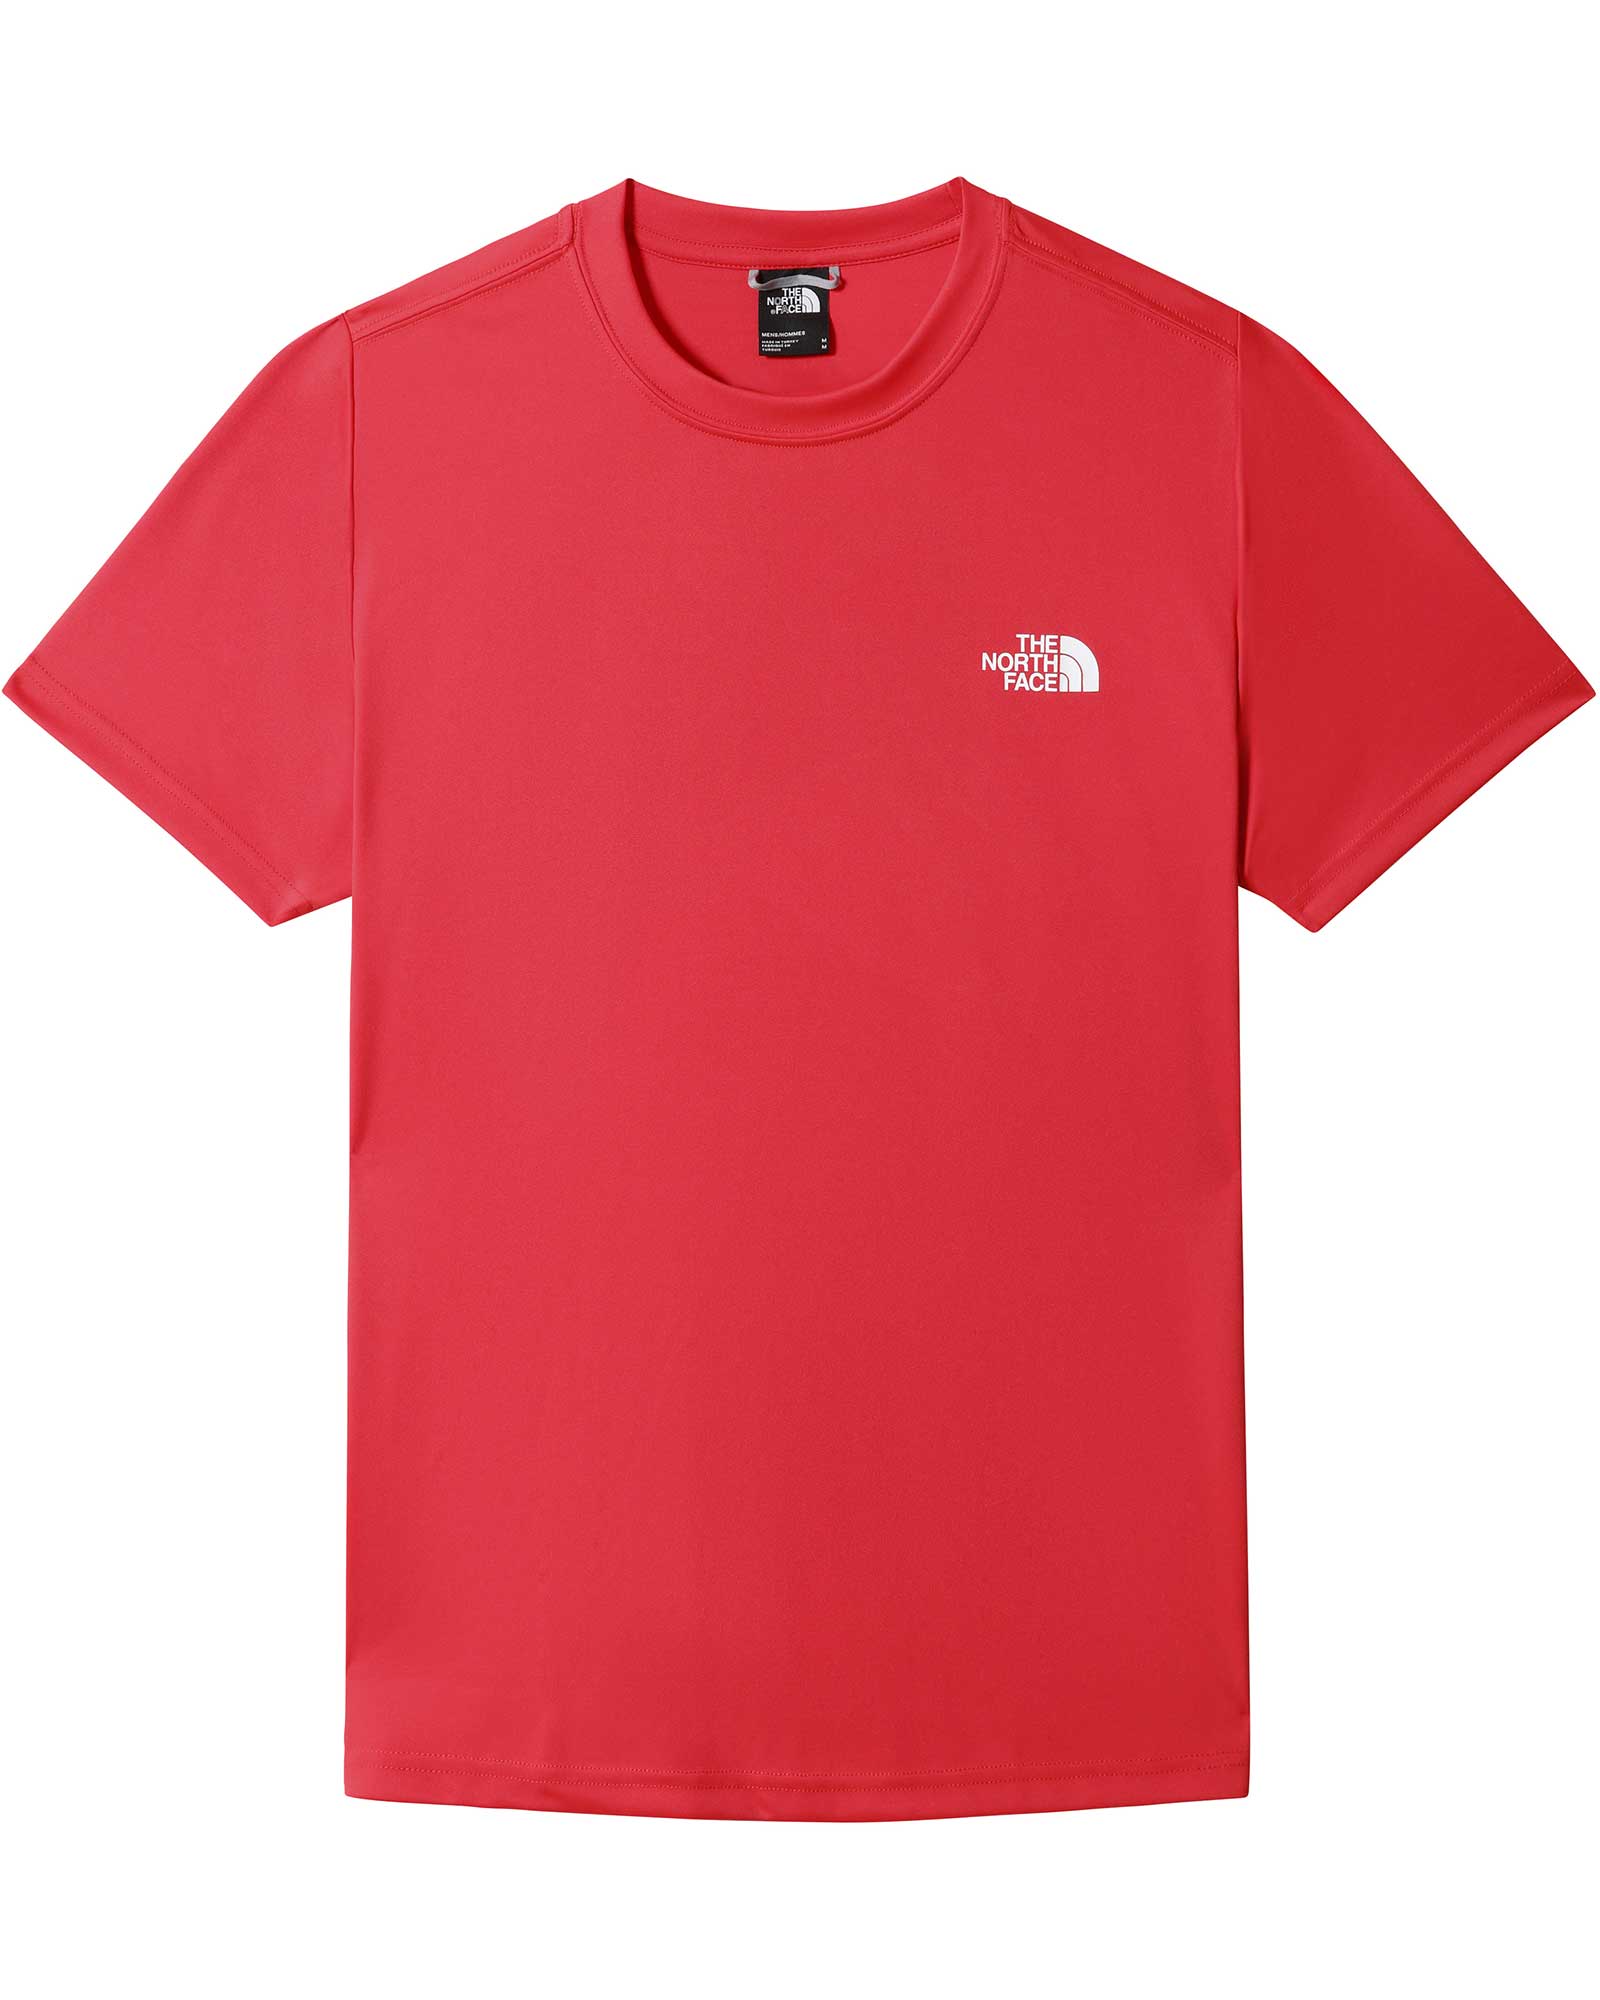 The North Face Reaxion Red Box Men’s T Shirt - Horizon Red S